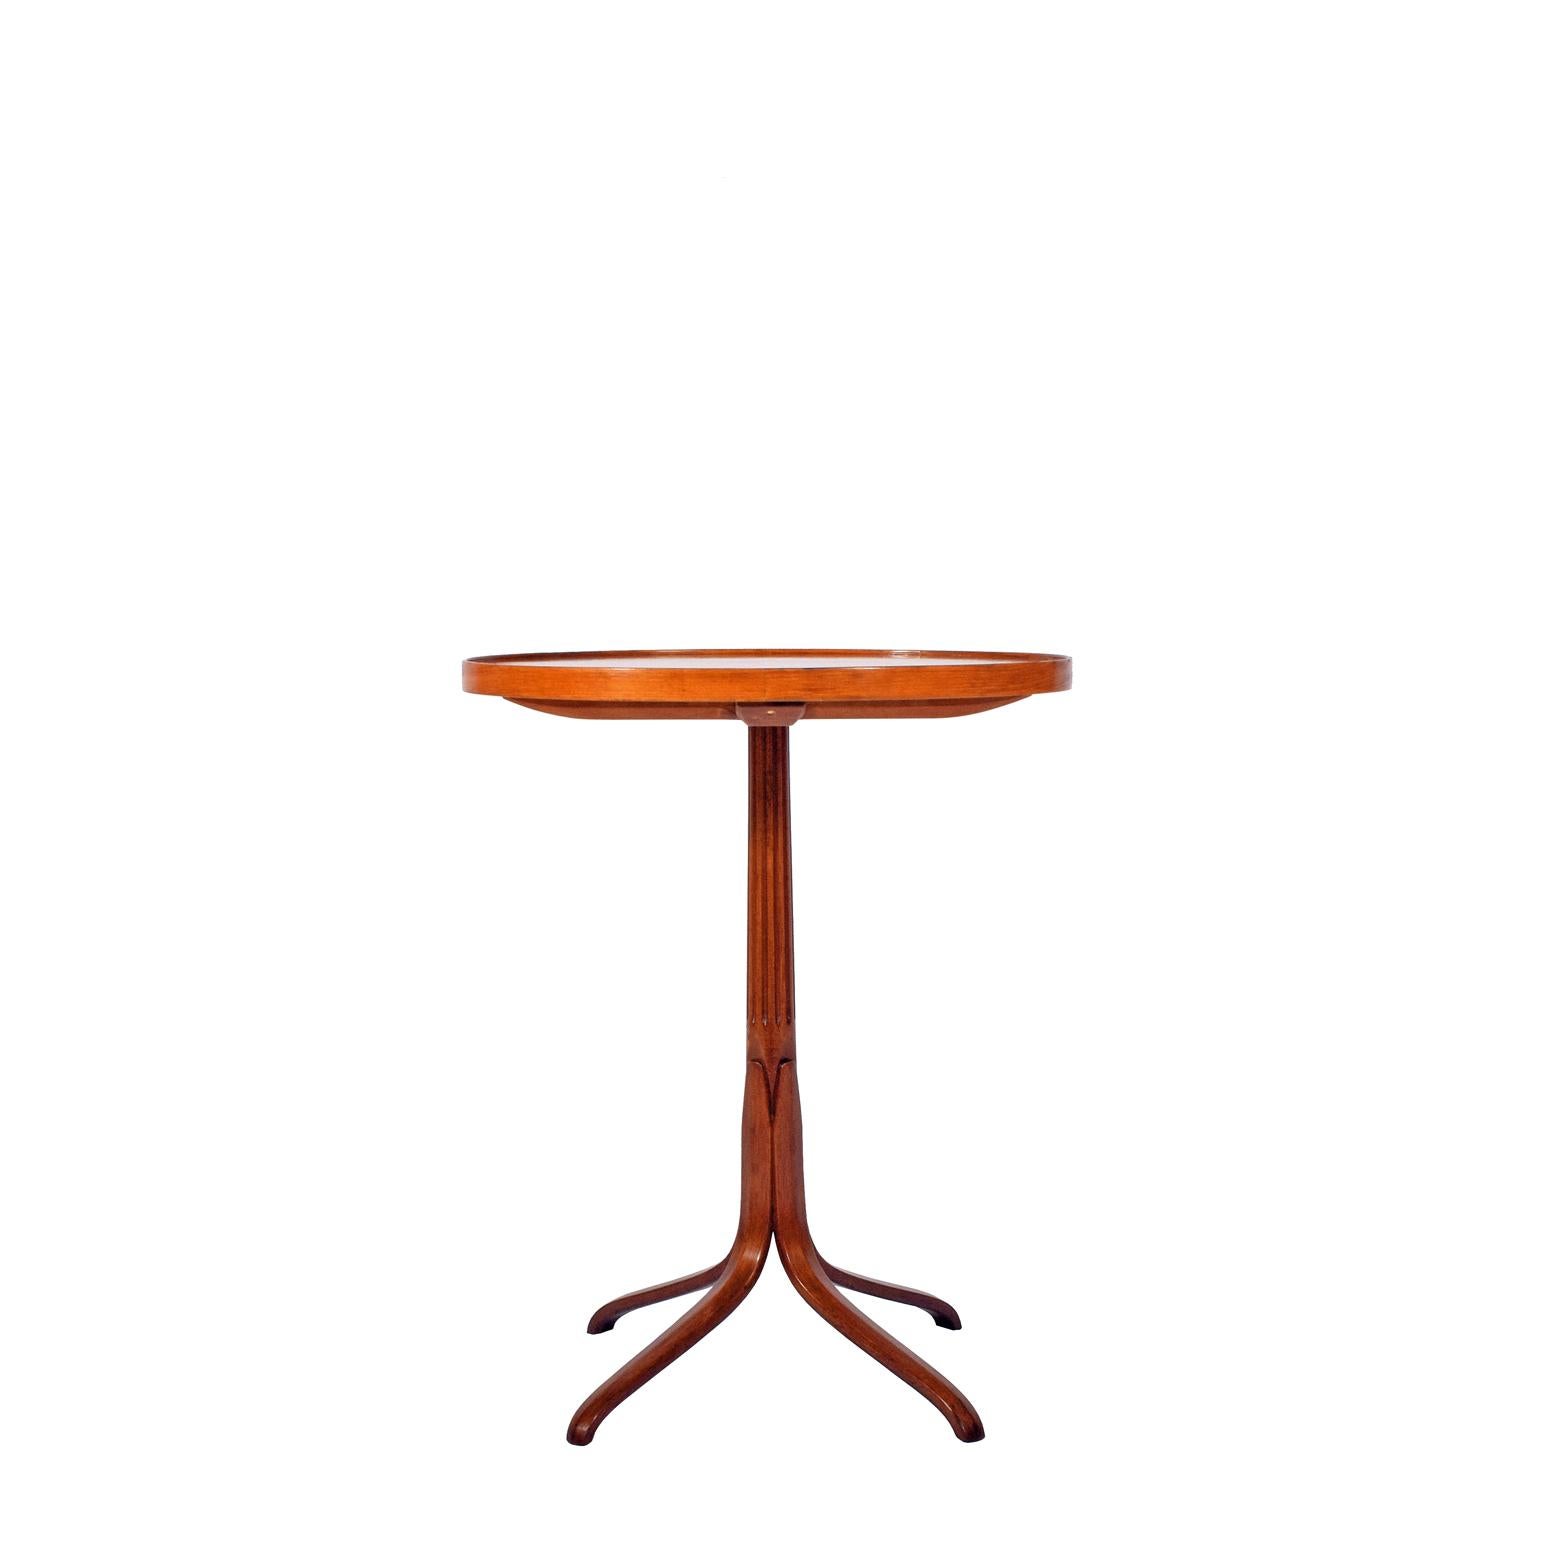 Teak base with oil top with intarsia made by Nordiska Company, 1950s.